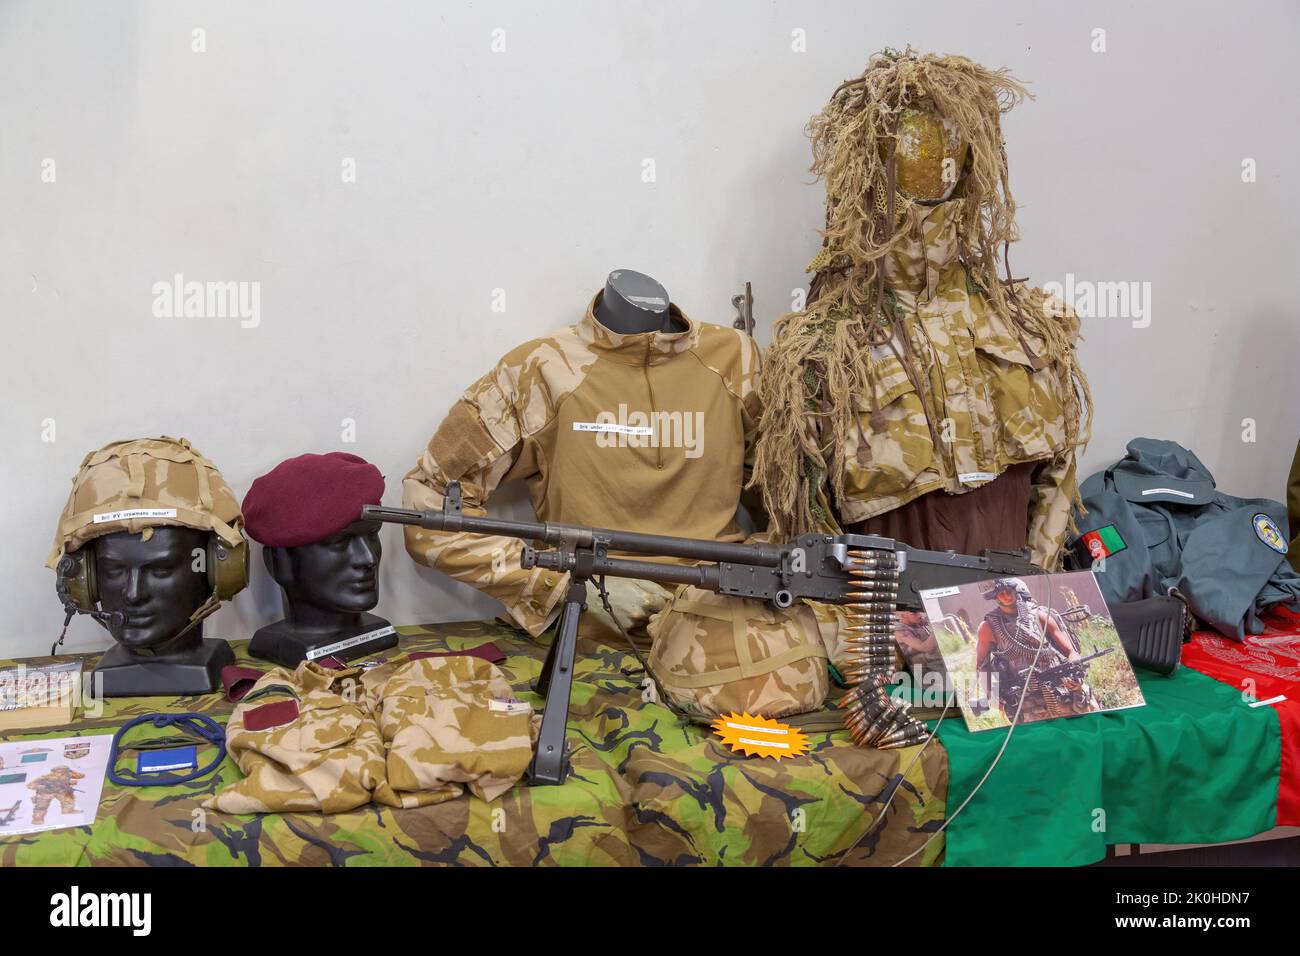 A display of weapons, body armor and camouflage gear used by the British Army in Afghanistan, on display at an arms and militaria show Stock Photo